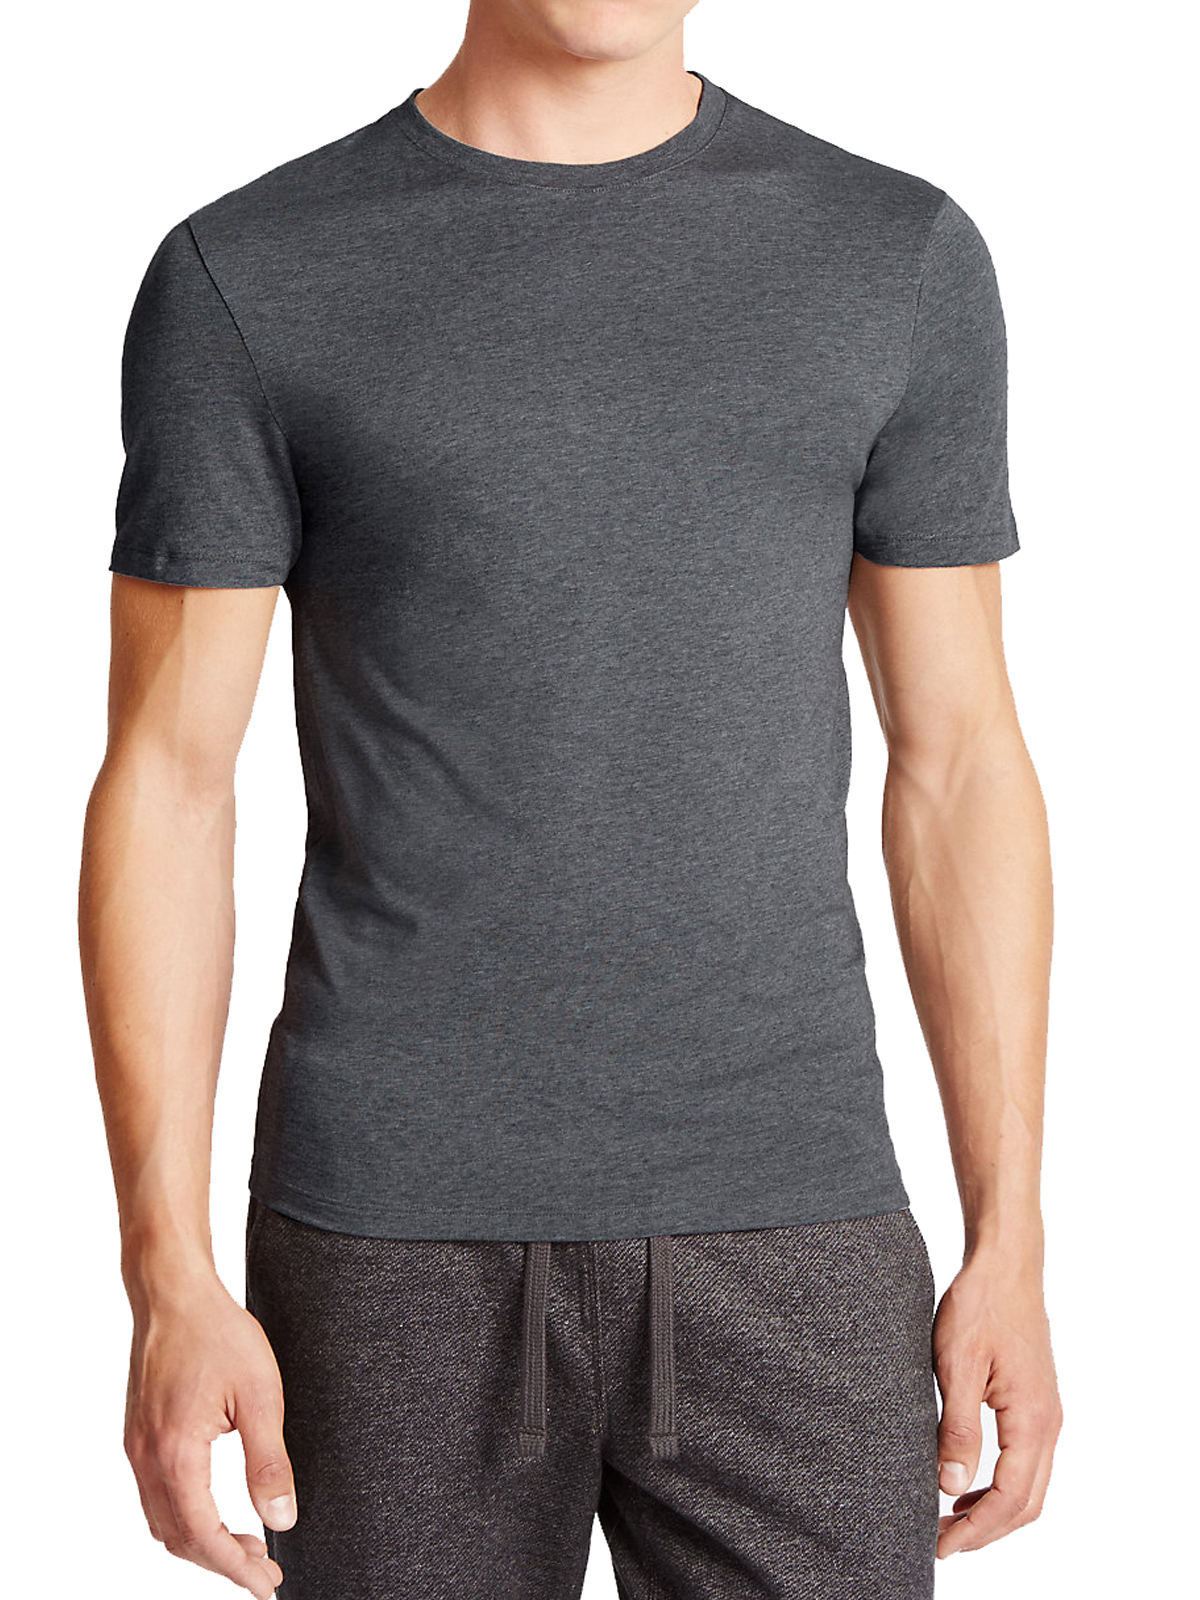 Marks and Spencer - - M&5 GREY Heatgen Thermal Short Sleeve Top - Size ...